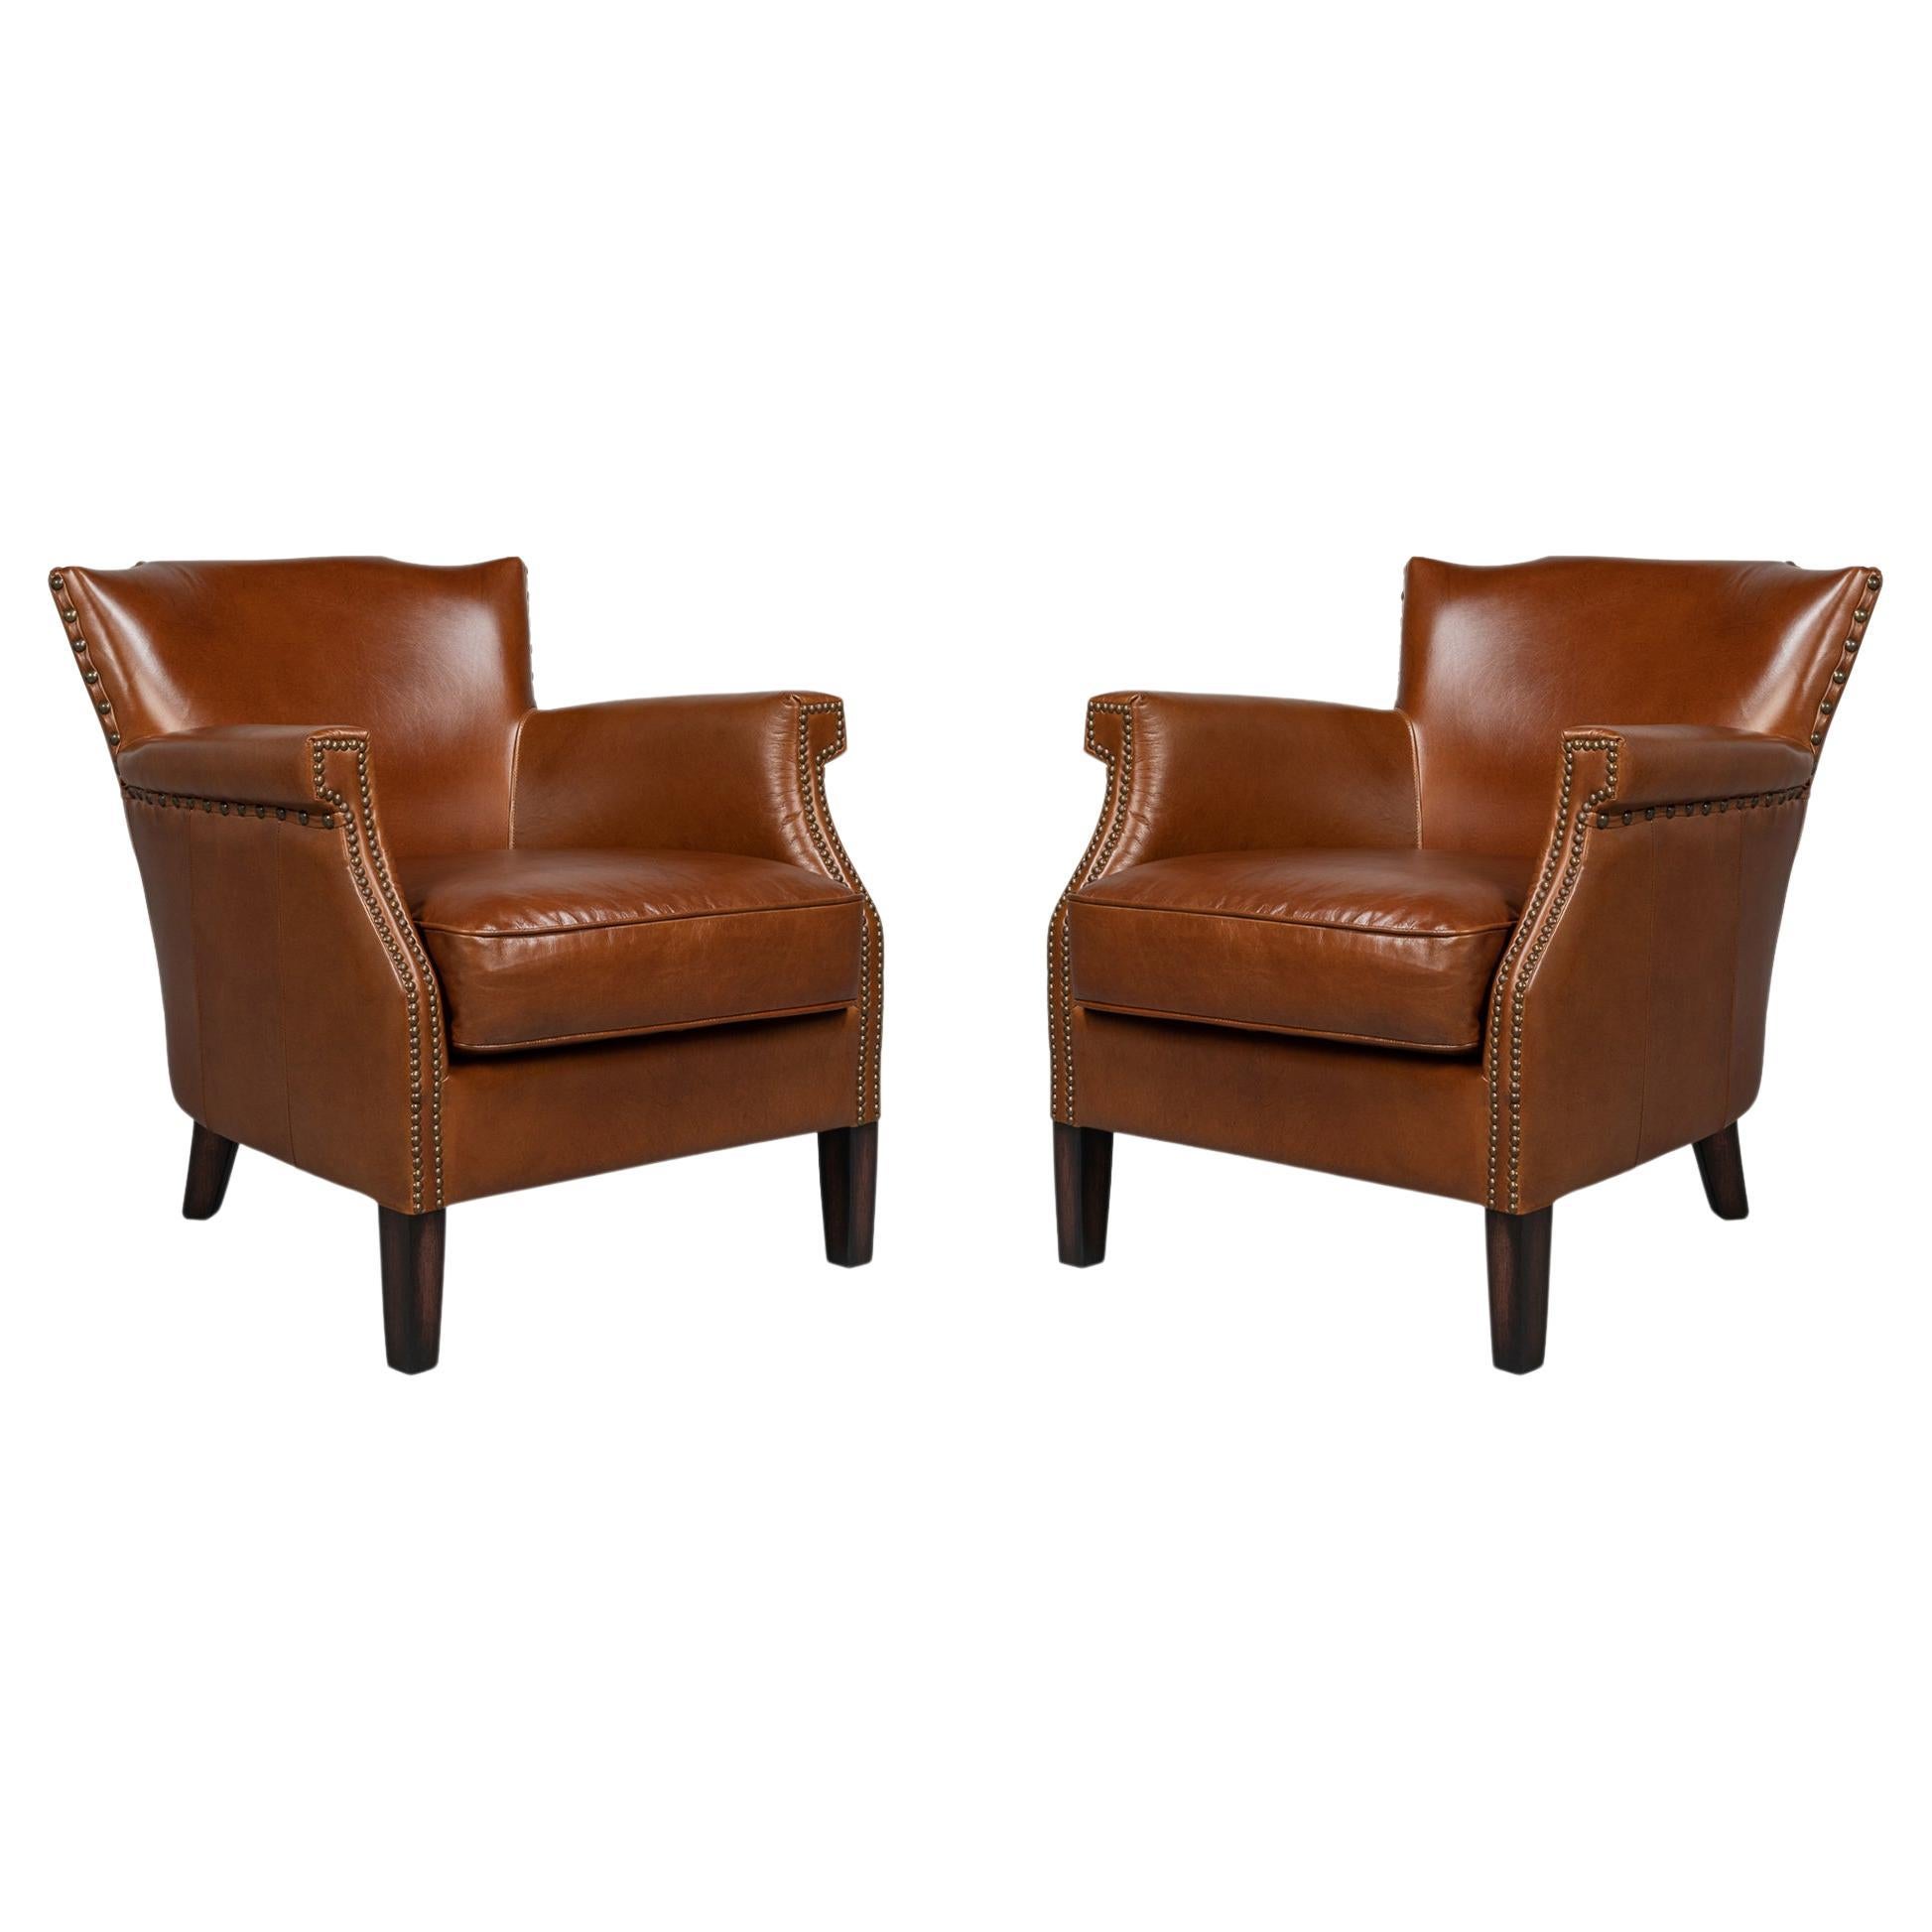 Pair of American West Leather Armchairs